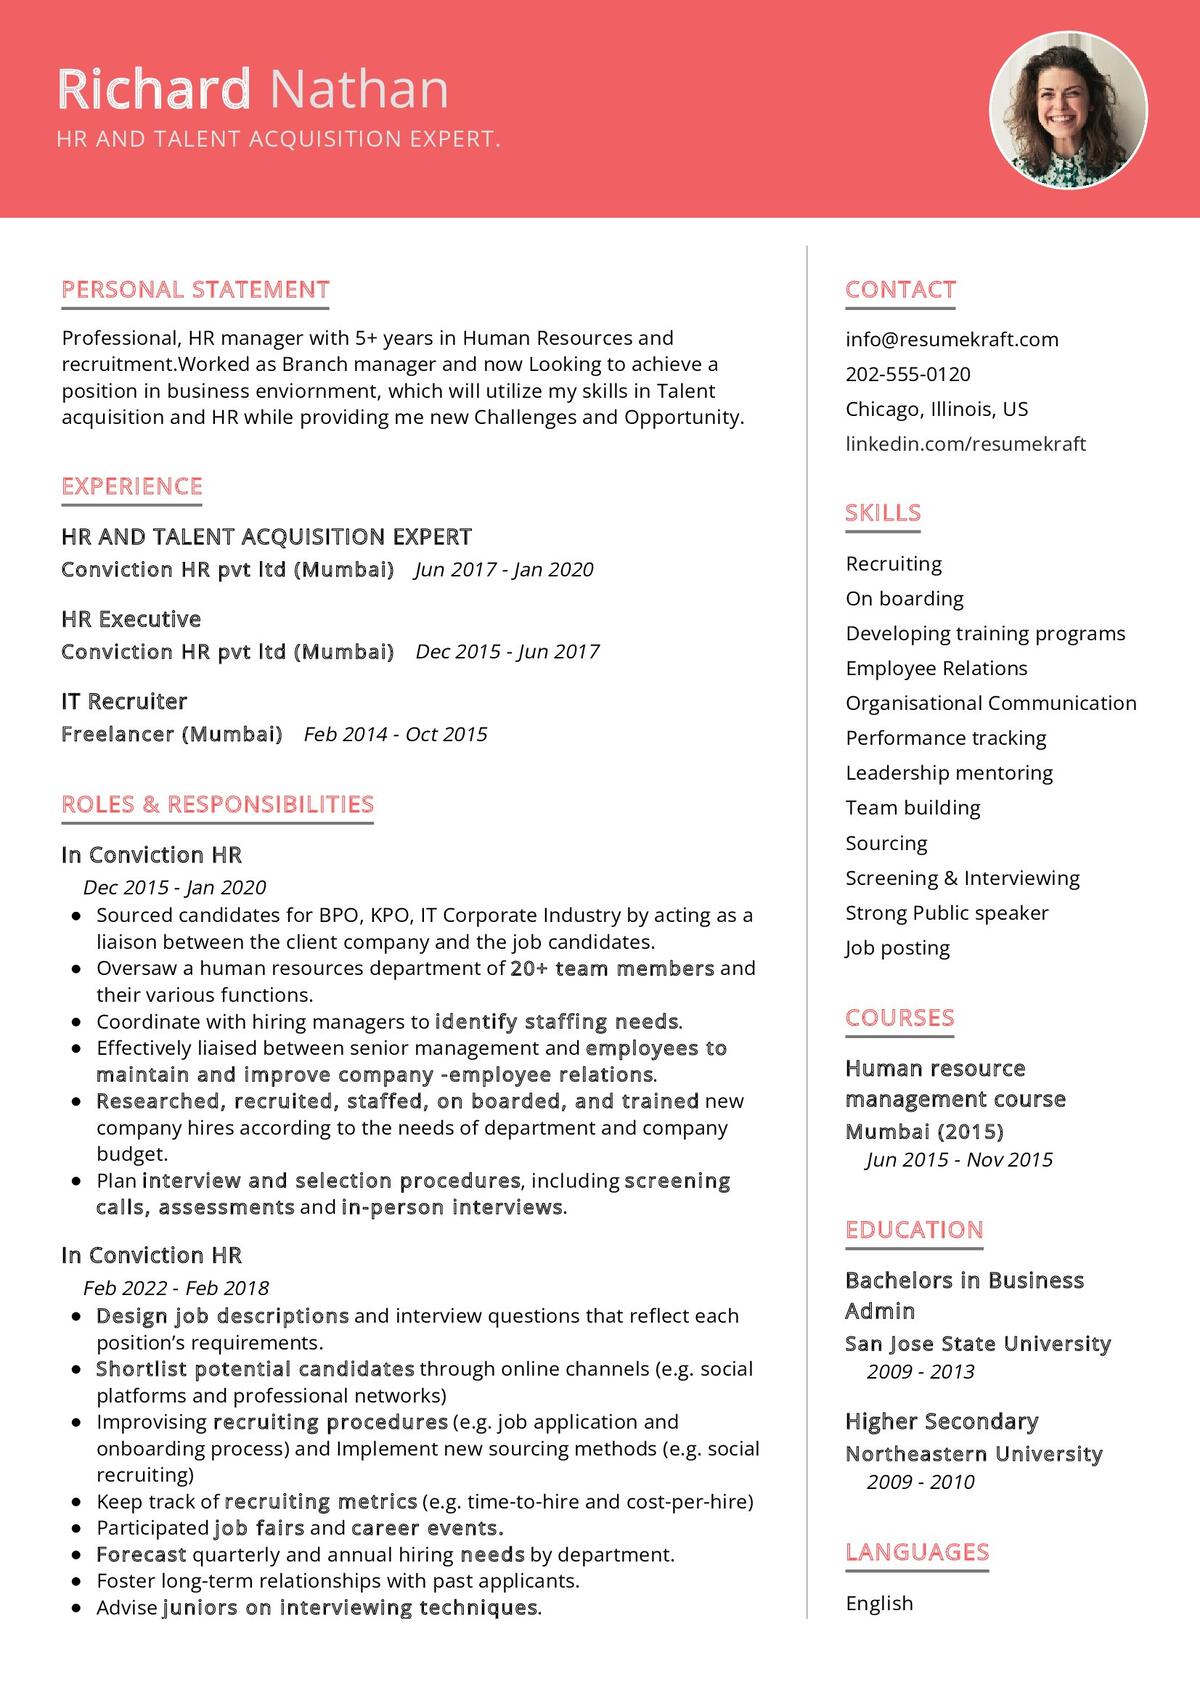 cv personal statement hr manager